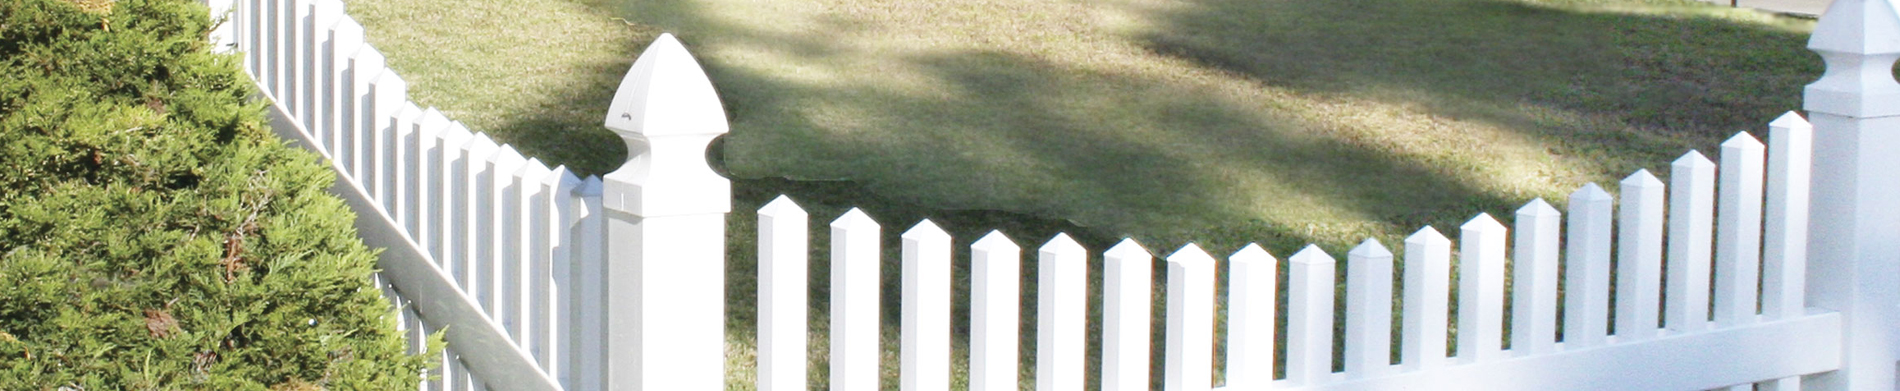 Best price vinyl fence from Duramax – A great addition to your property